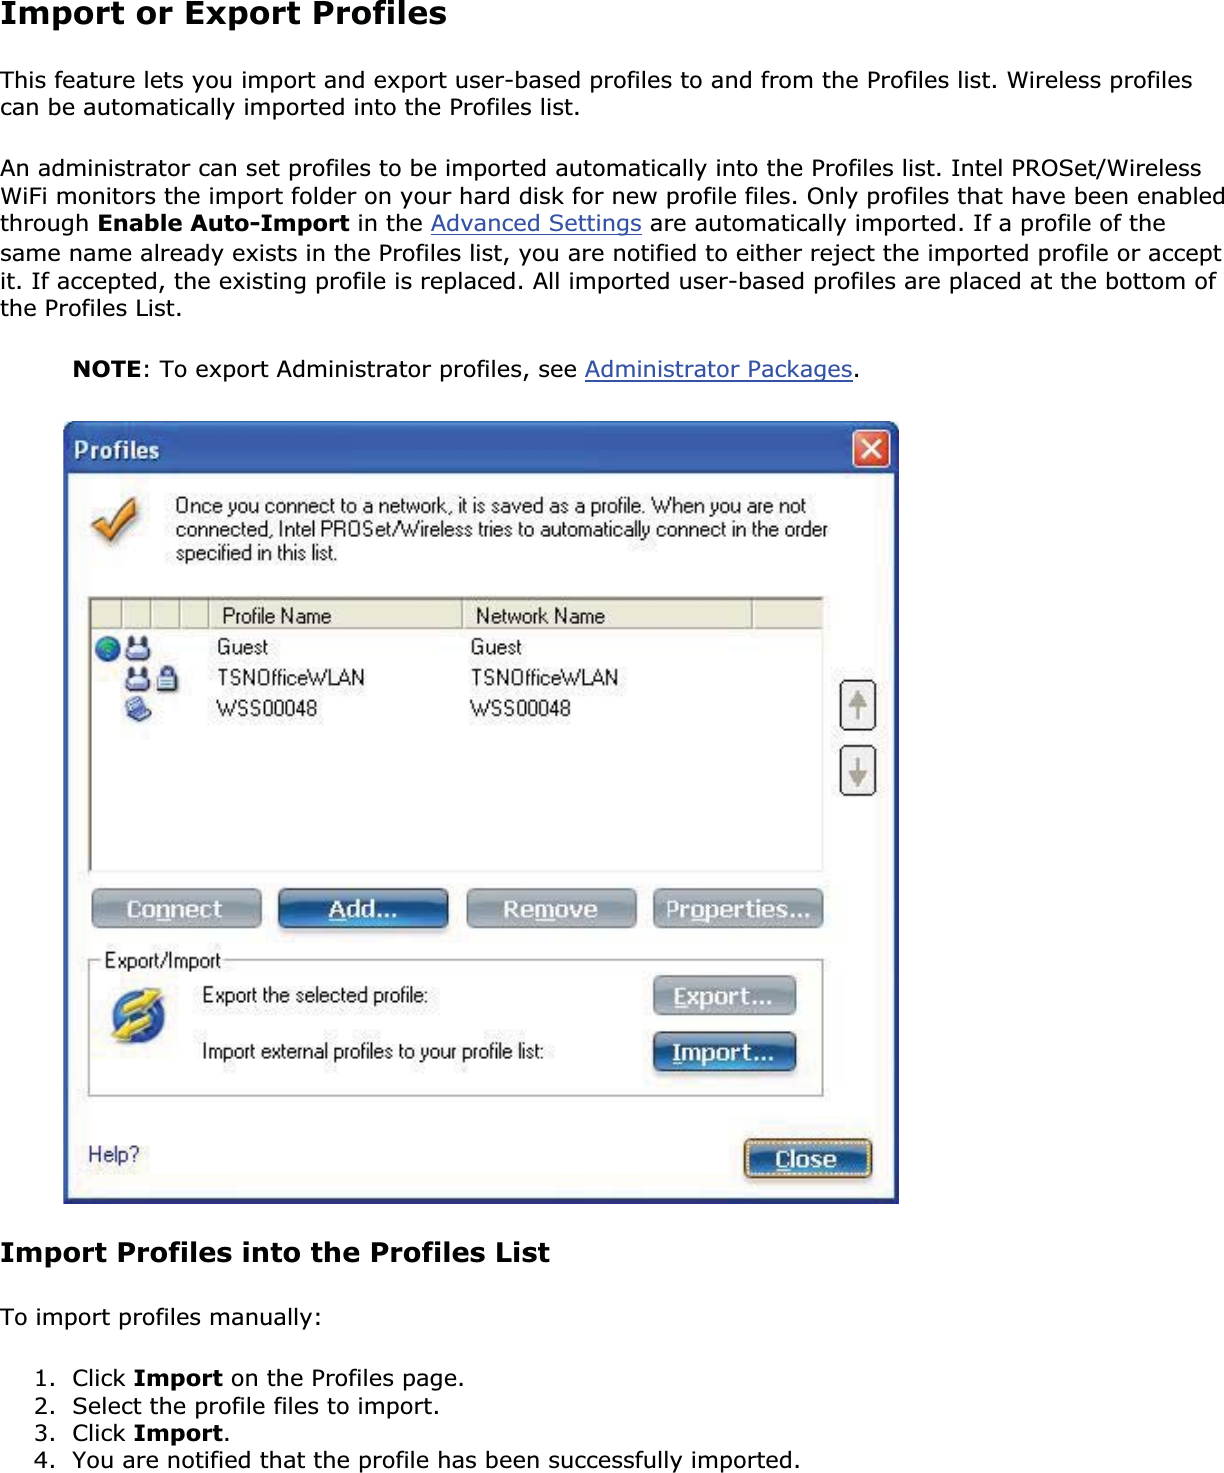 Import or Export ProfilesThis feature lets you import and export user-based profiles to and from the Profiles list. Wireless profiles can be automatically imported into the Profiles list. An administrator can set profiles to be imported automatically into the Profiles list. Intel PROSet/Wireless WiFi monitors the import folder on your hard disk for new profile files. Only profiles that have been enabled through Enable Auto-Import in the Advanced Settings are automatically imported. If a profile of the same name already exists in the Profiles list, you are notified to either reject the imported profile or accept it. If accepted, the existing profile is replaced. All imported user-based profiles are placed at the bottom of the Profiles List. NOTE: To export Administrator profiles, see Administrator Packages.Import Profiles into the Profiles ListTo import profiles manually: 1. Click Import on the Profiles page.2. Select the profile files to import.3. Click Import.4. You are notified that the profile has been successfully imported.